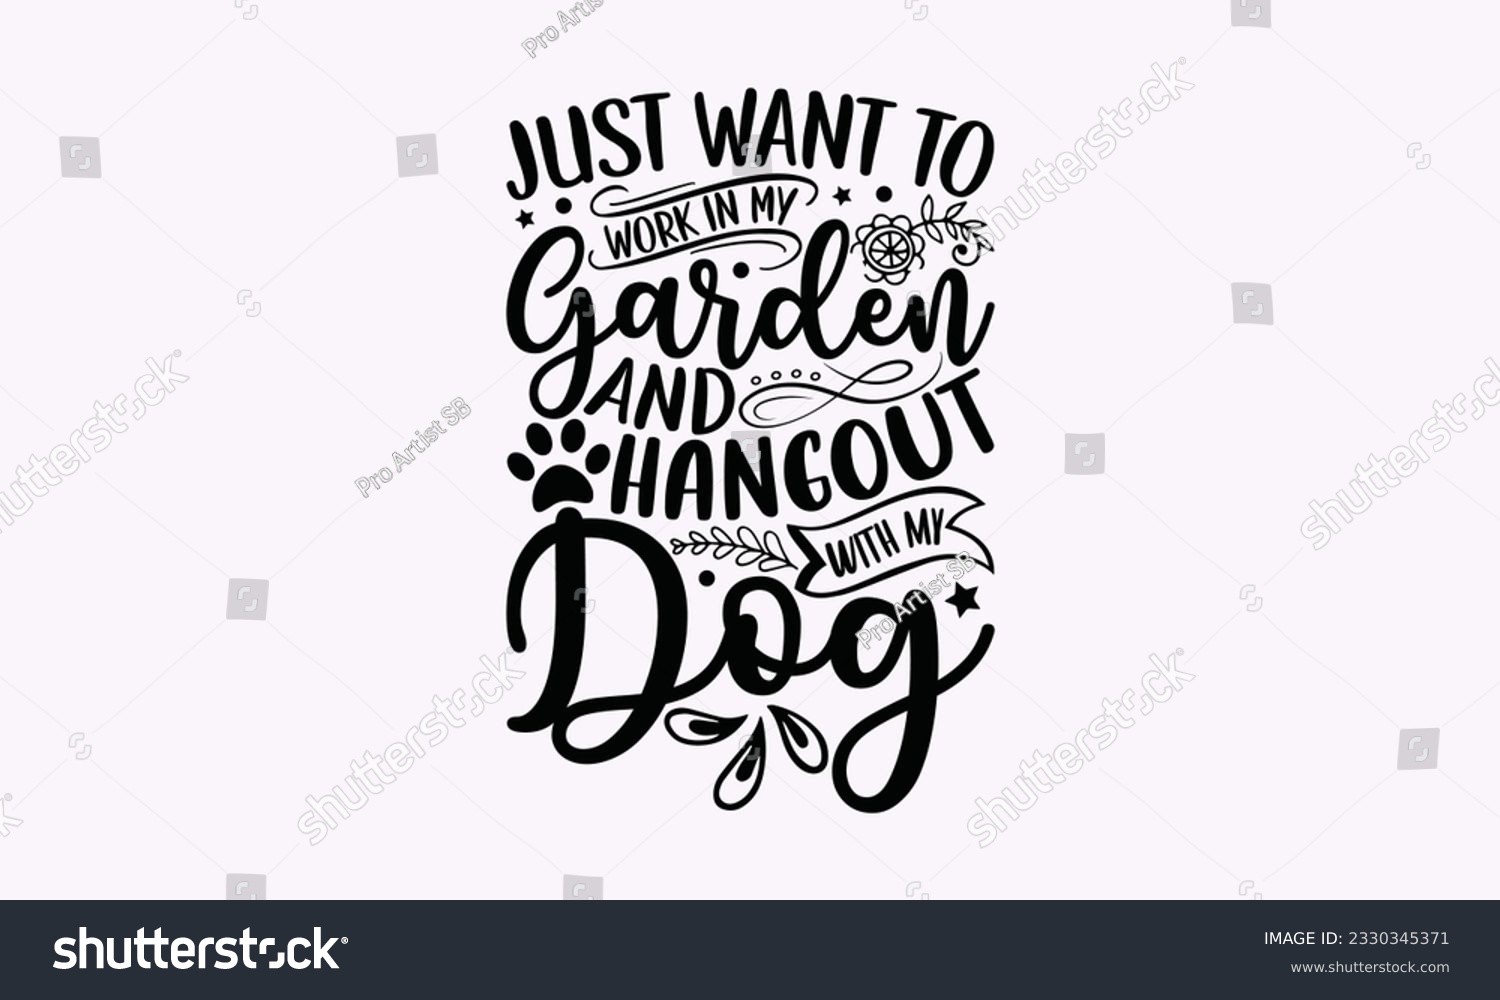 SVG of Just want to work in my garden and hangout with my dog - Gardening SVG Design, Flower Quotes, Calligraphy graphic design, Typography poster with old style camera and quote. svg